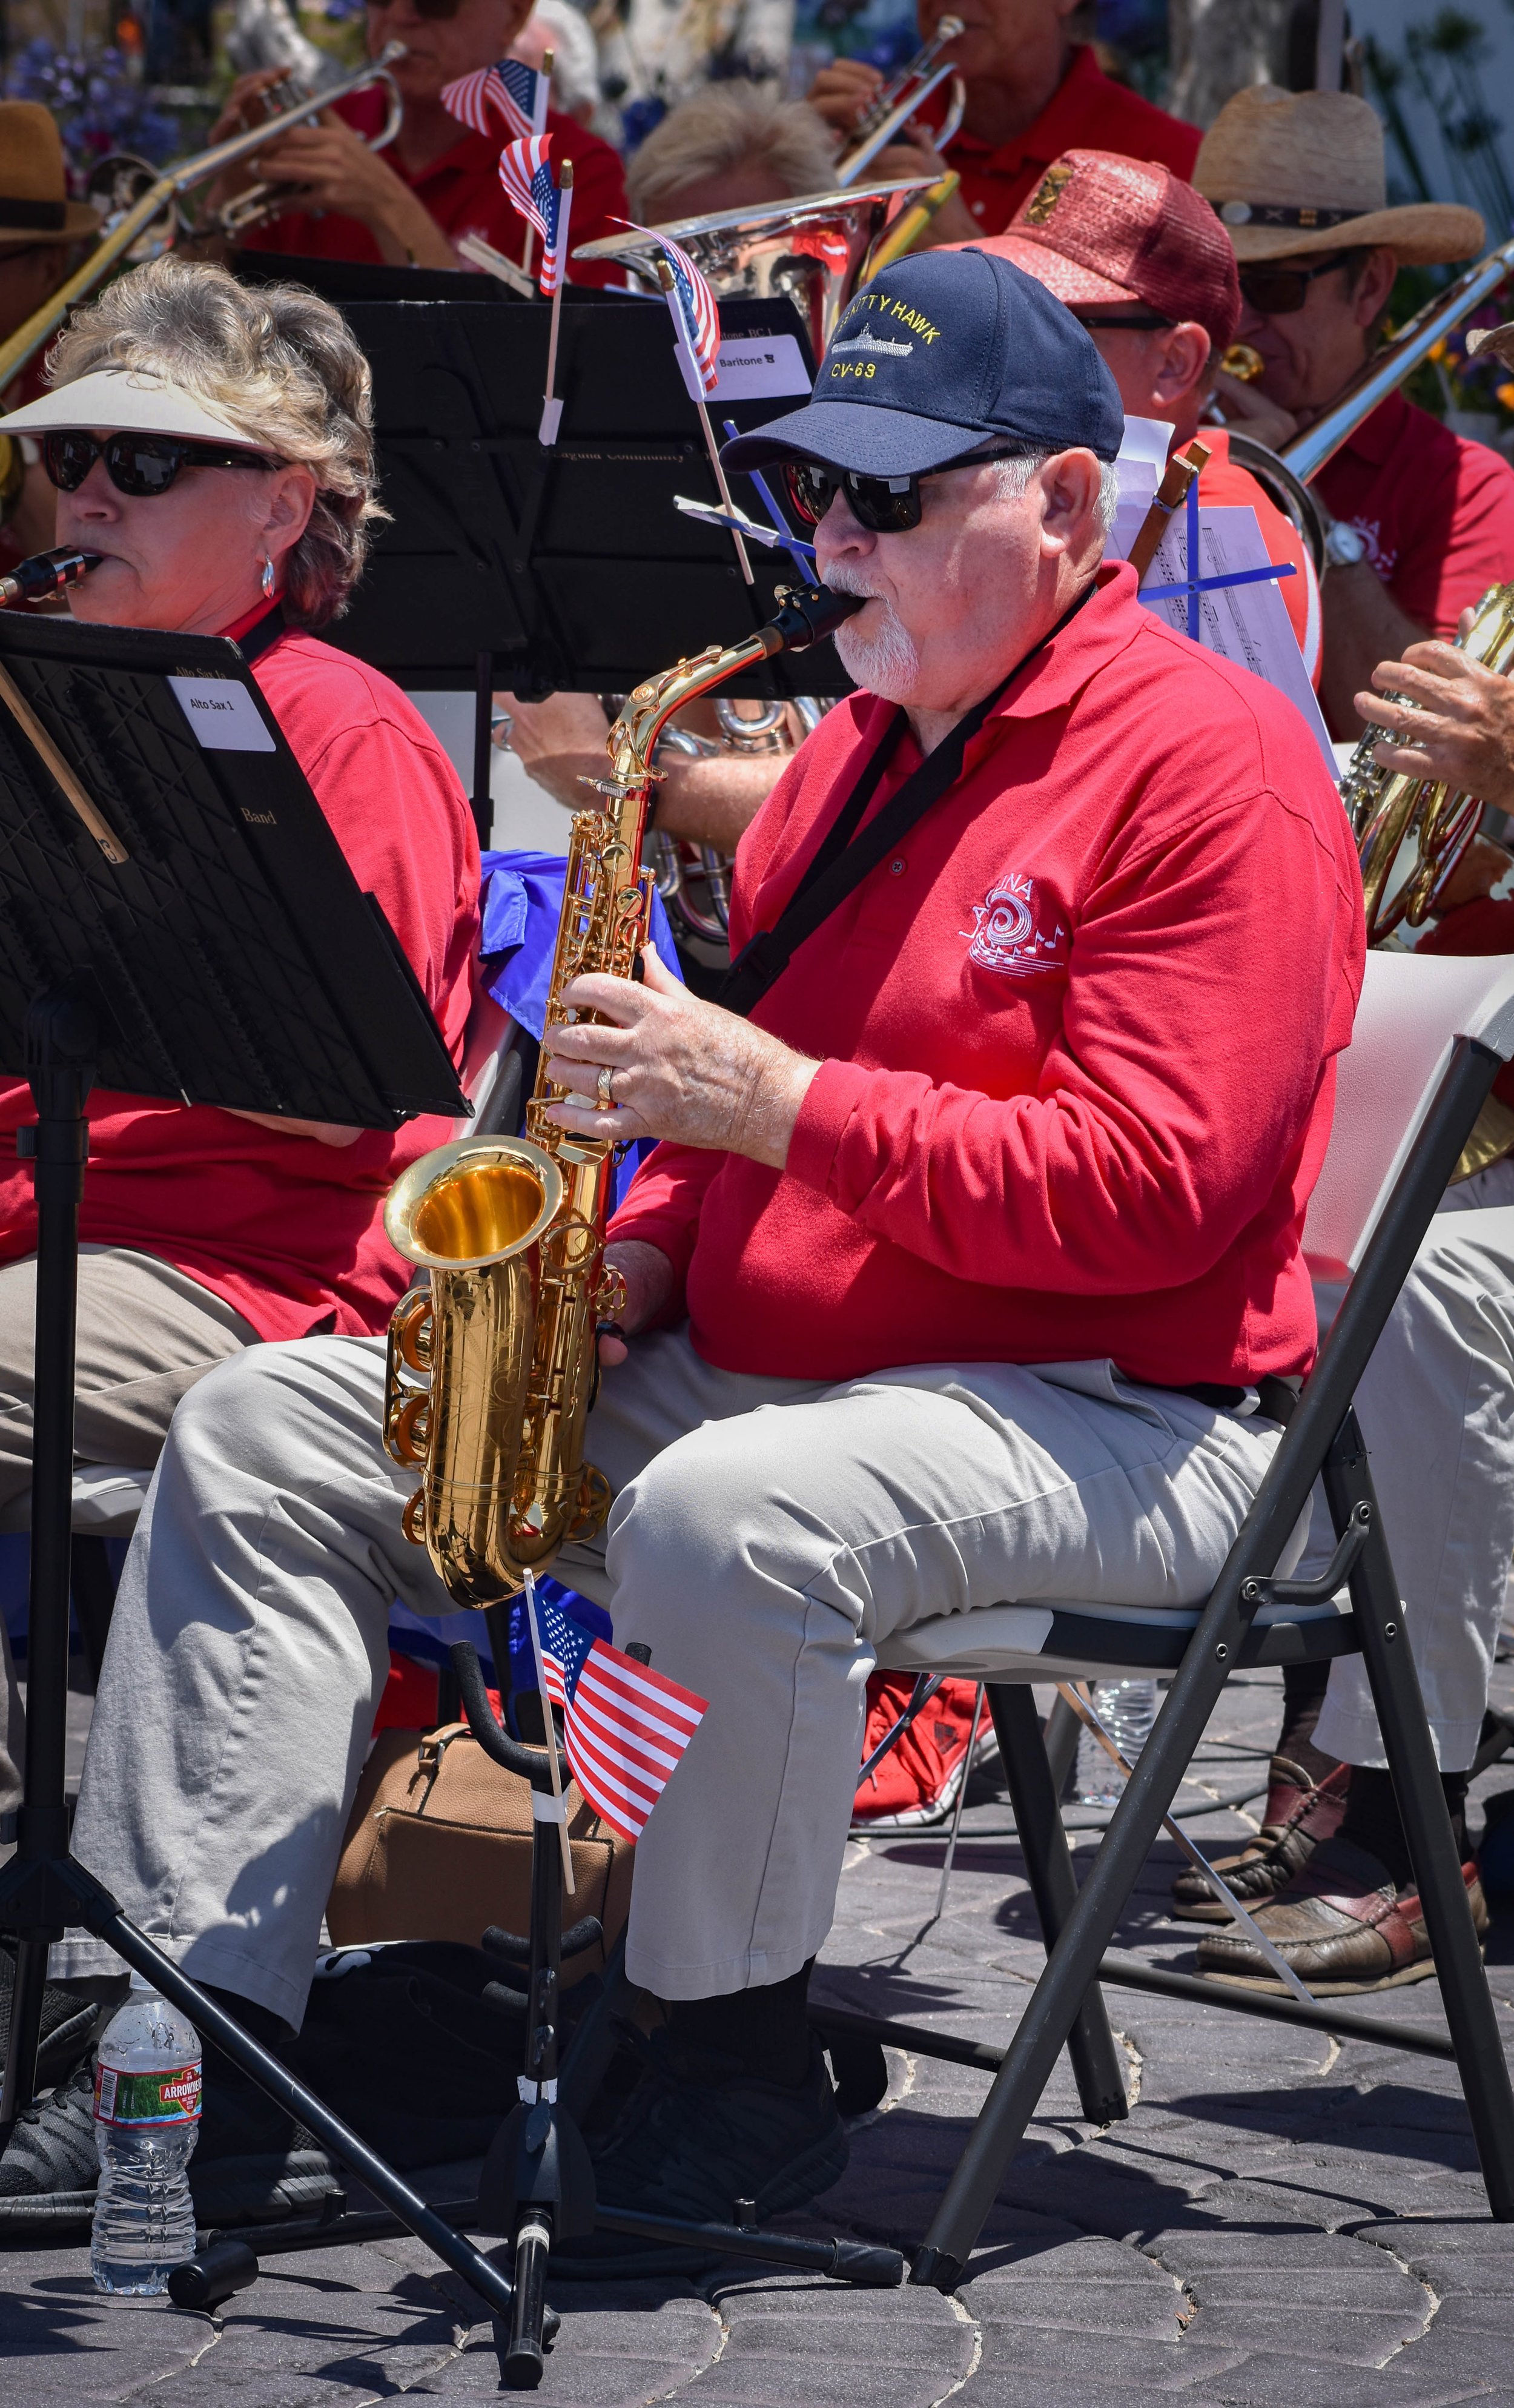 05-30-2022 LCCB Memorial Day Concert by Peyton Webster2-3.jpg